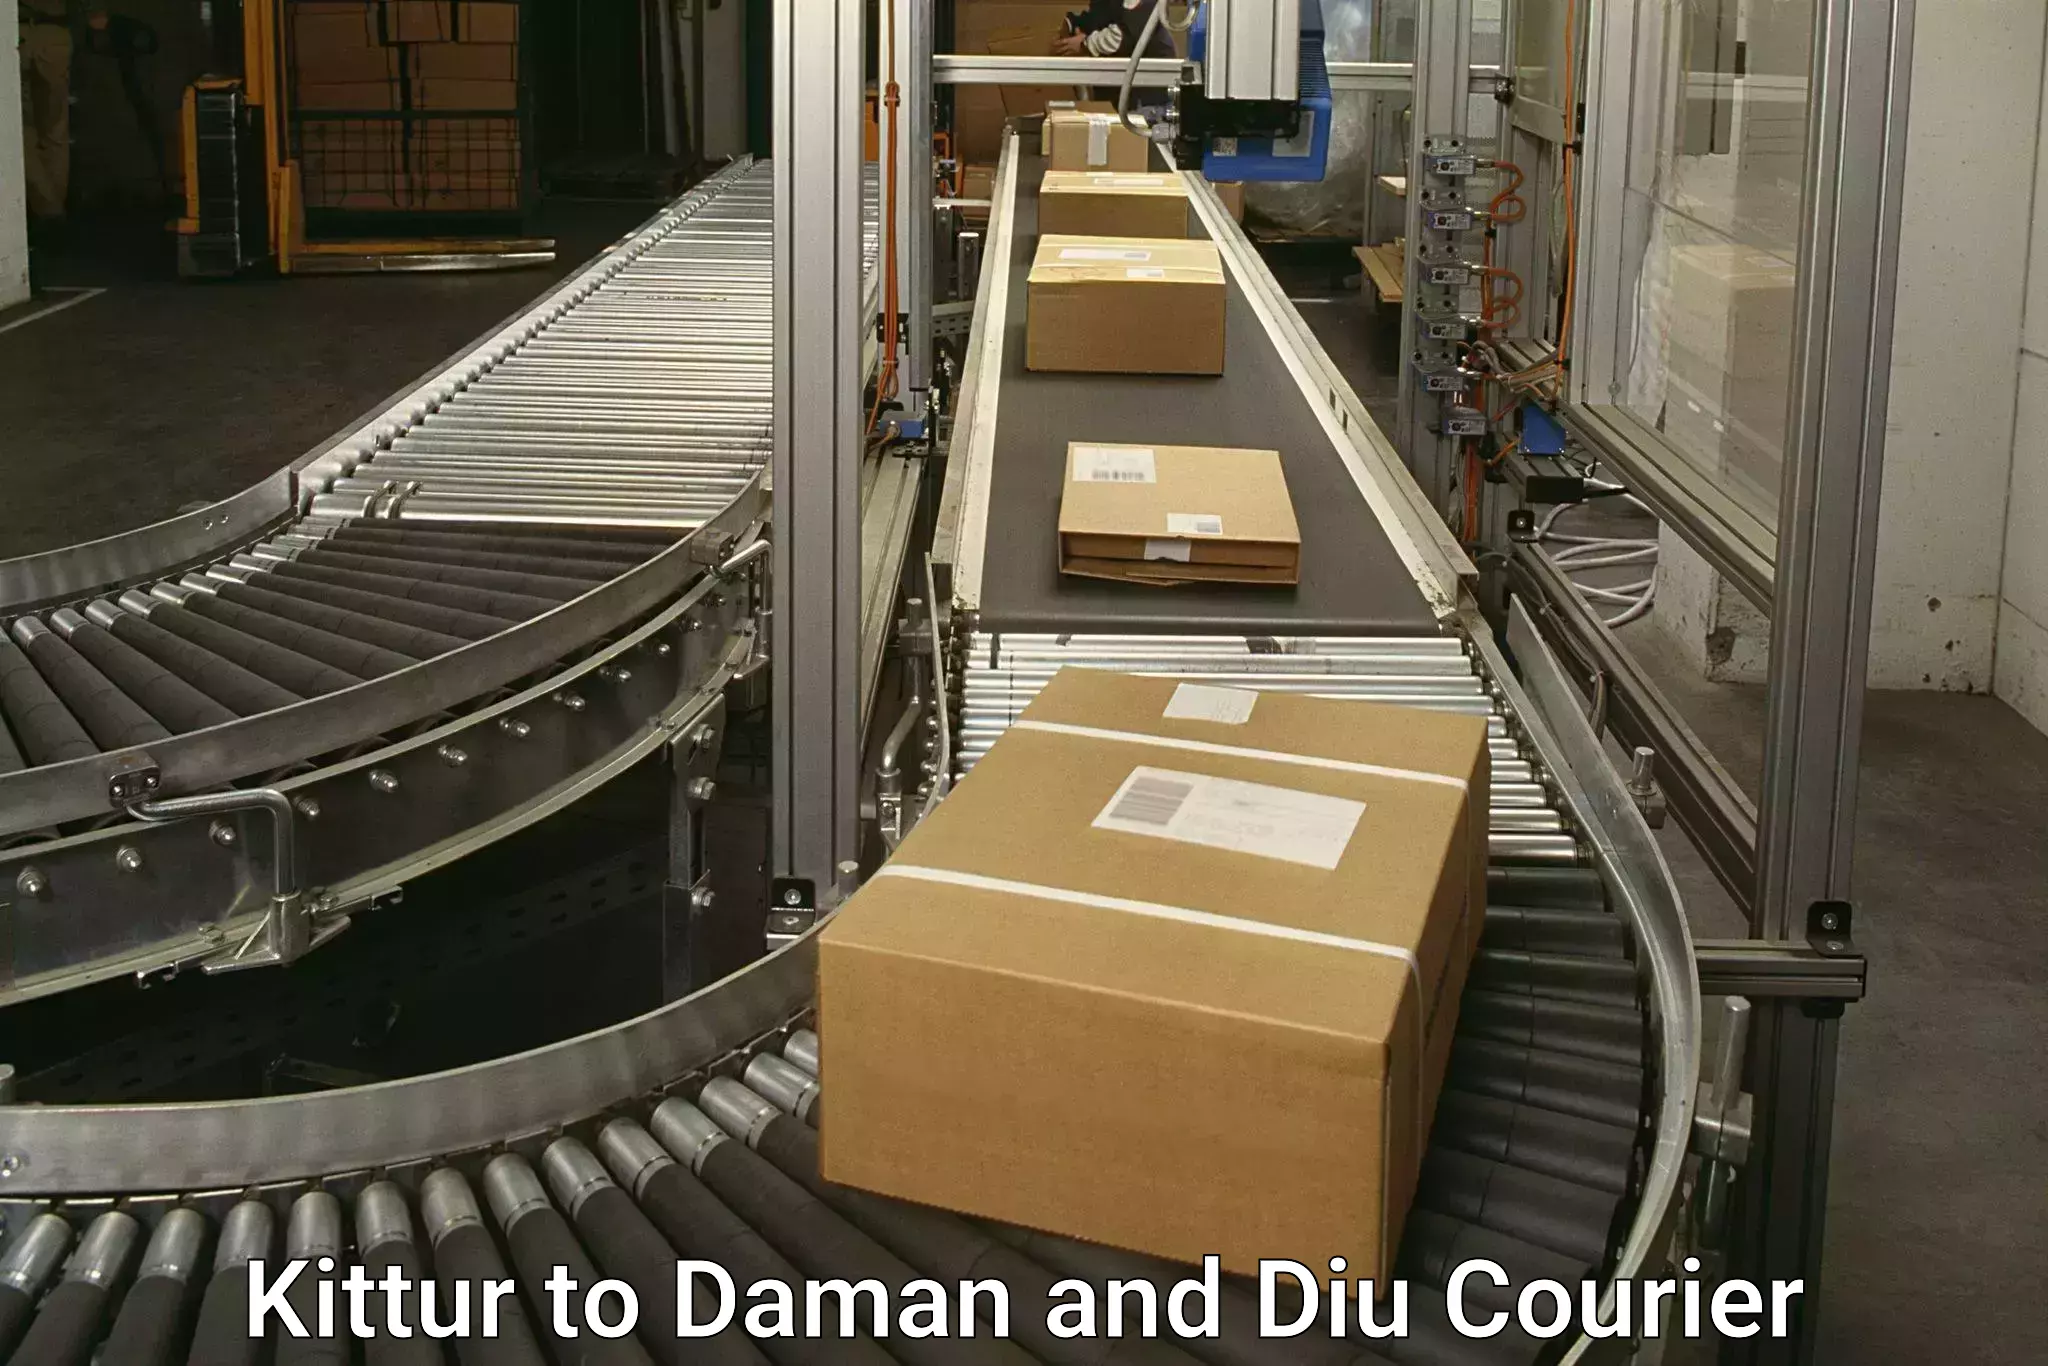 Automated parcel services Kittur to Daman